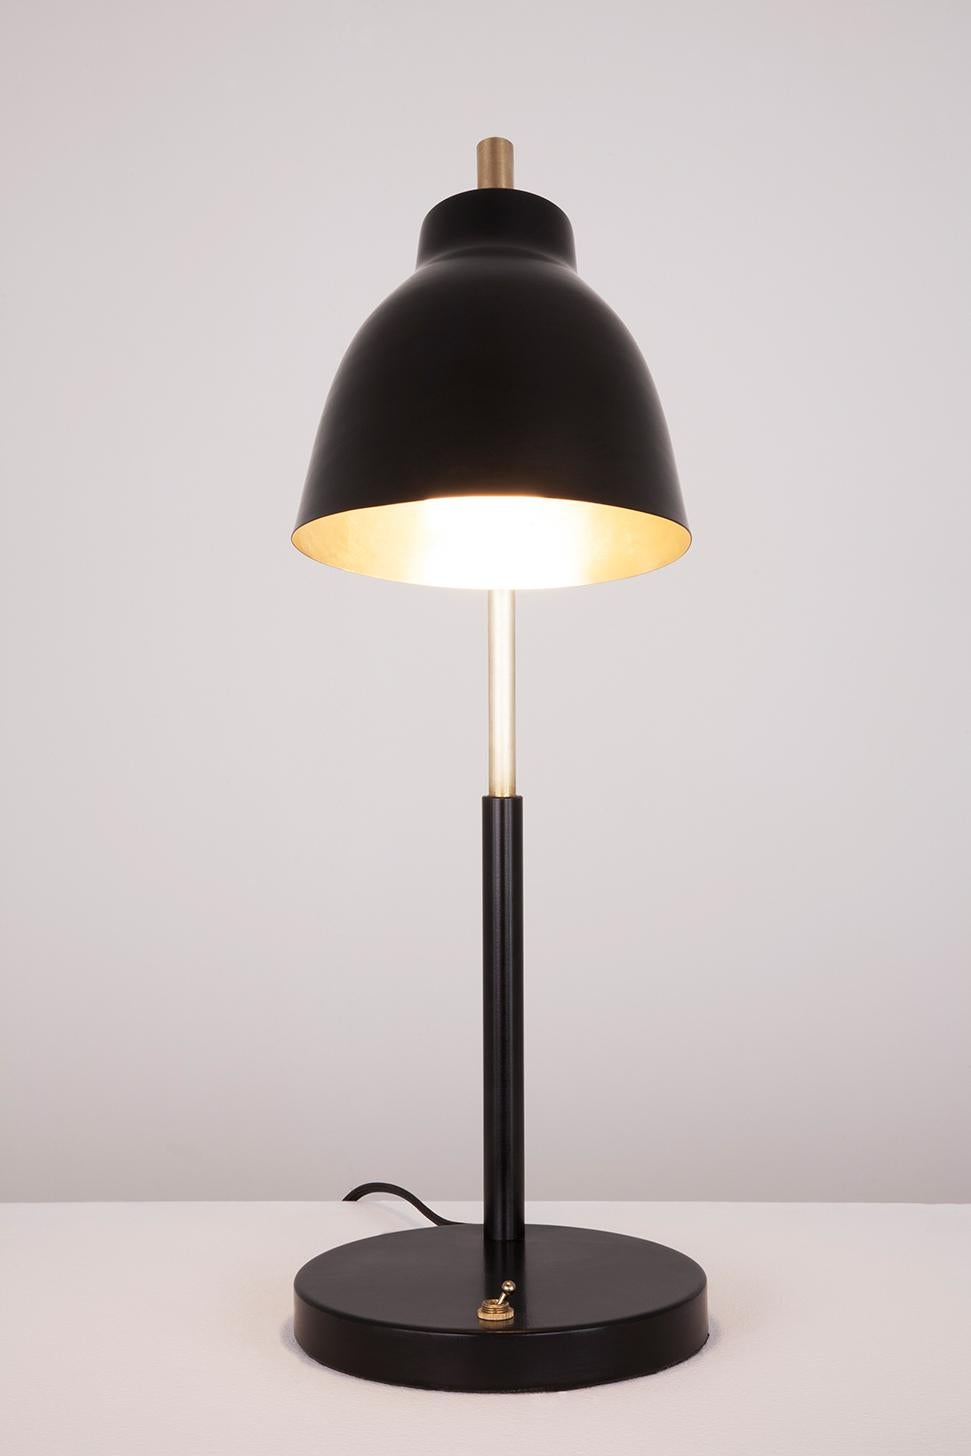 Mid-Century Modern Navire Table Lamp with Adjustable Solid Brass Arm and Powder Coat Tilting Shade